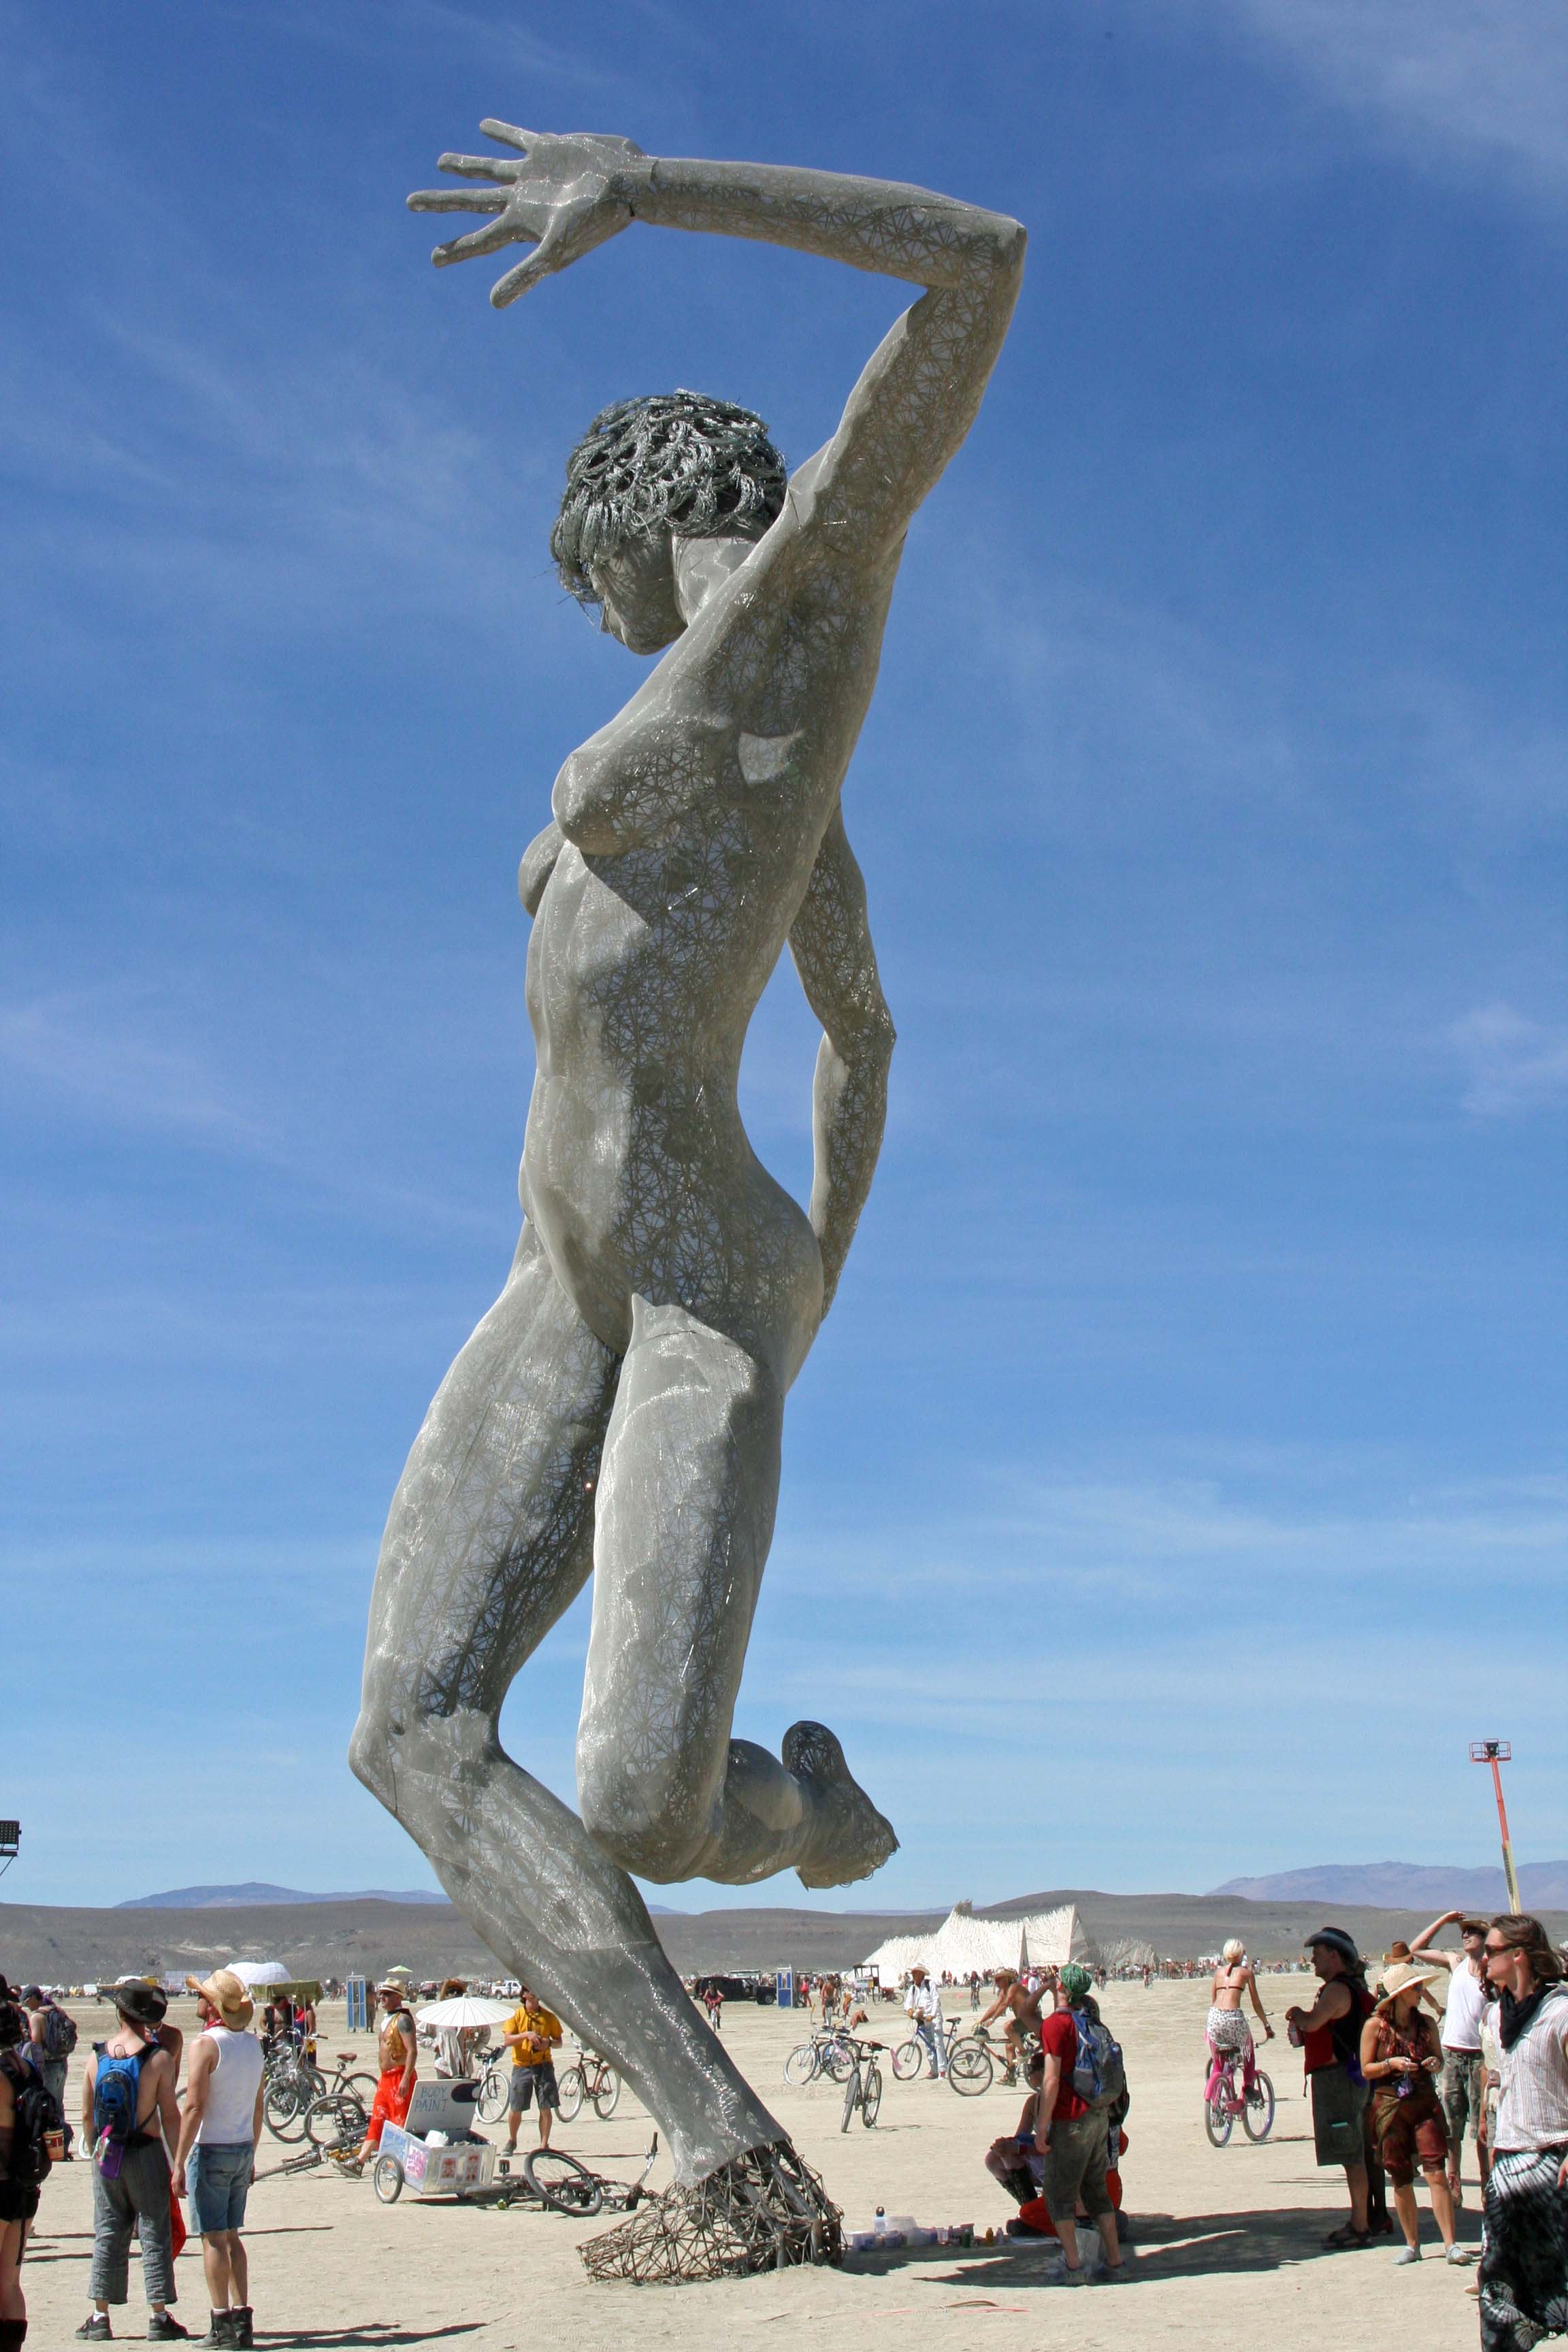 The art at Burning Man can be spectacular, such as this tall, nude woman.